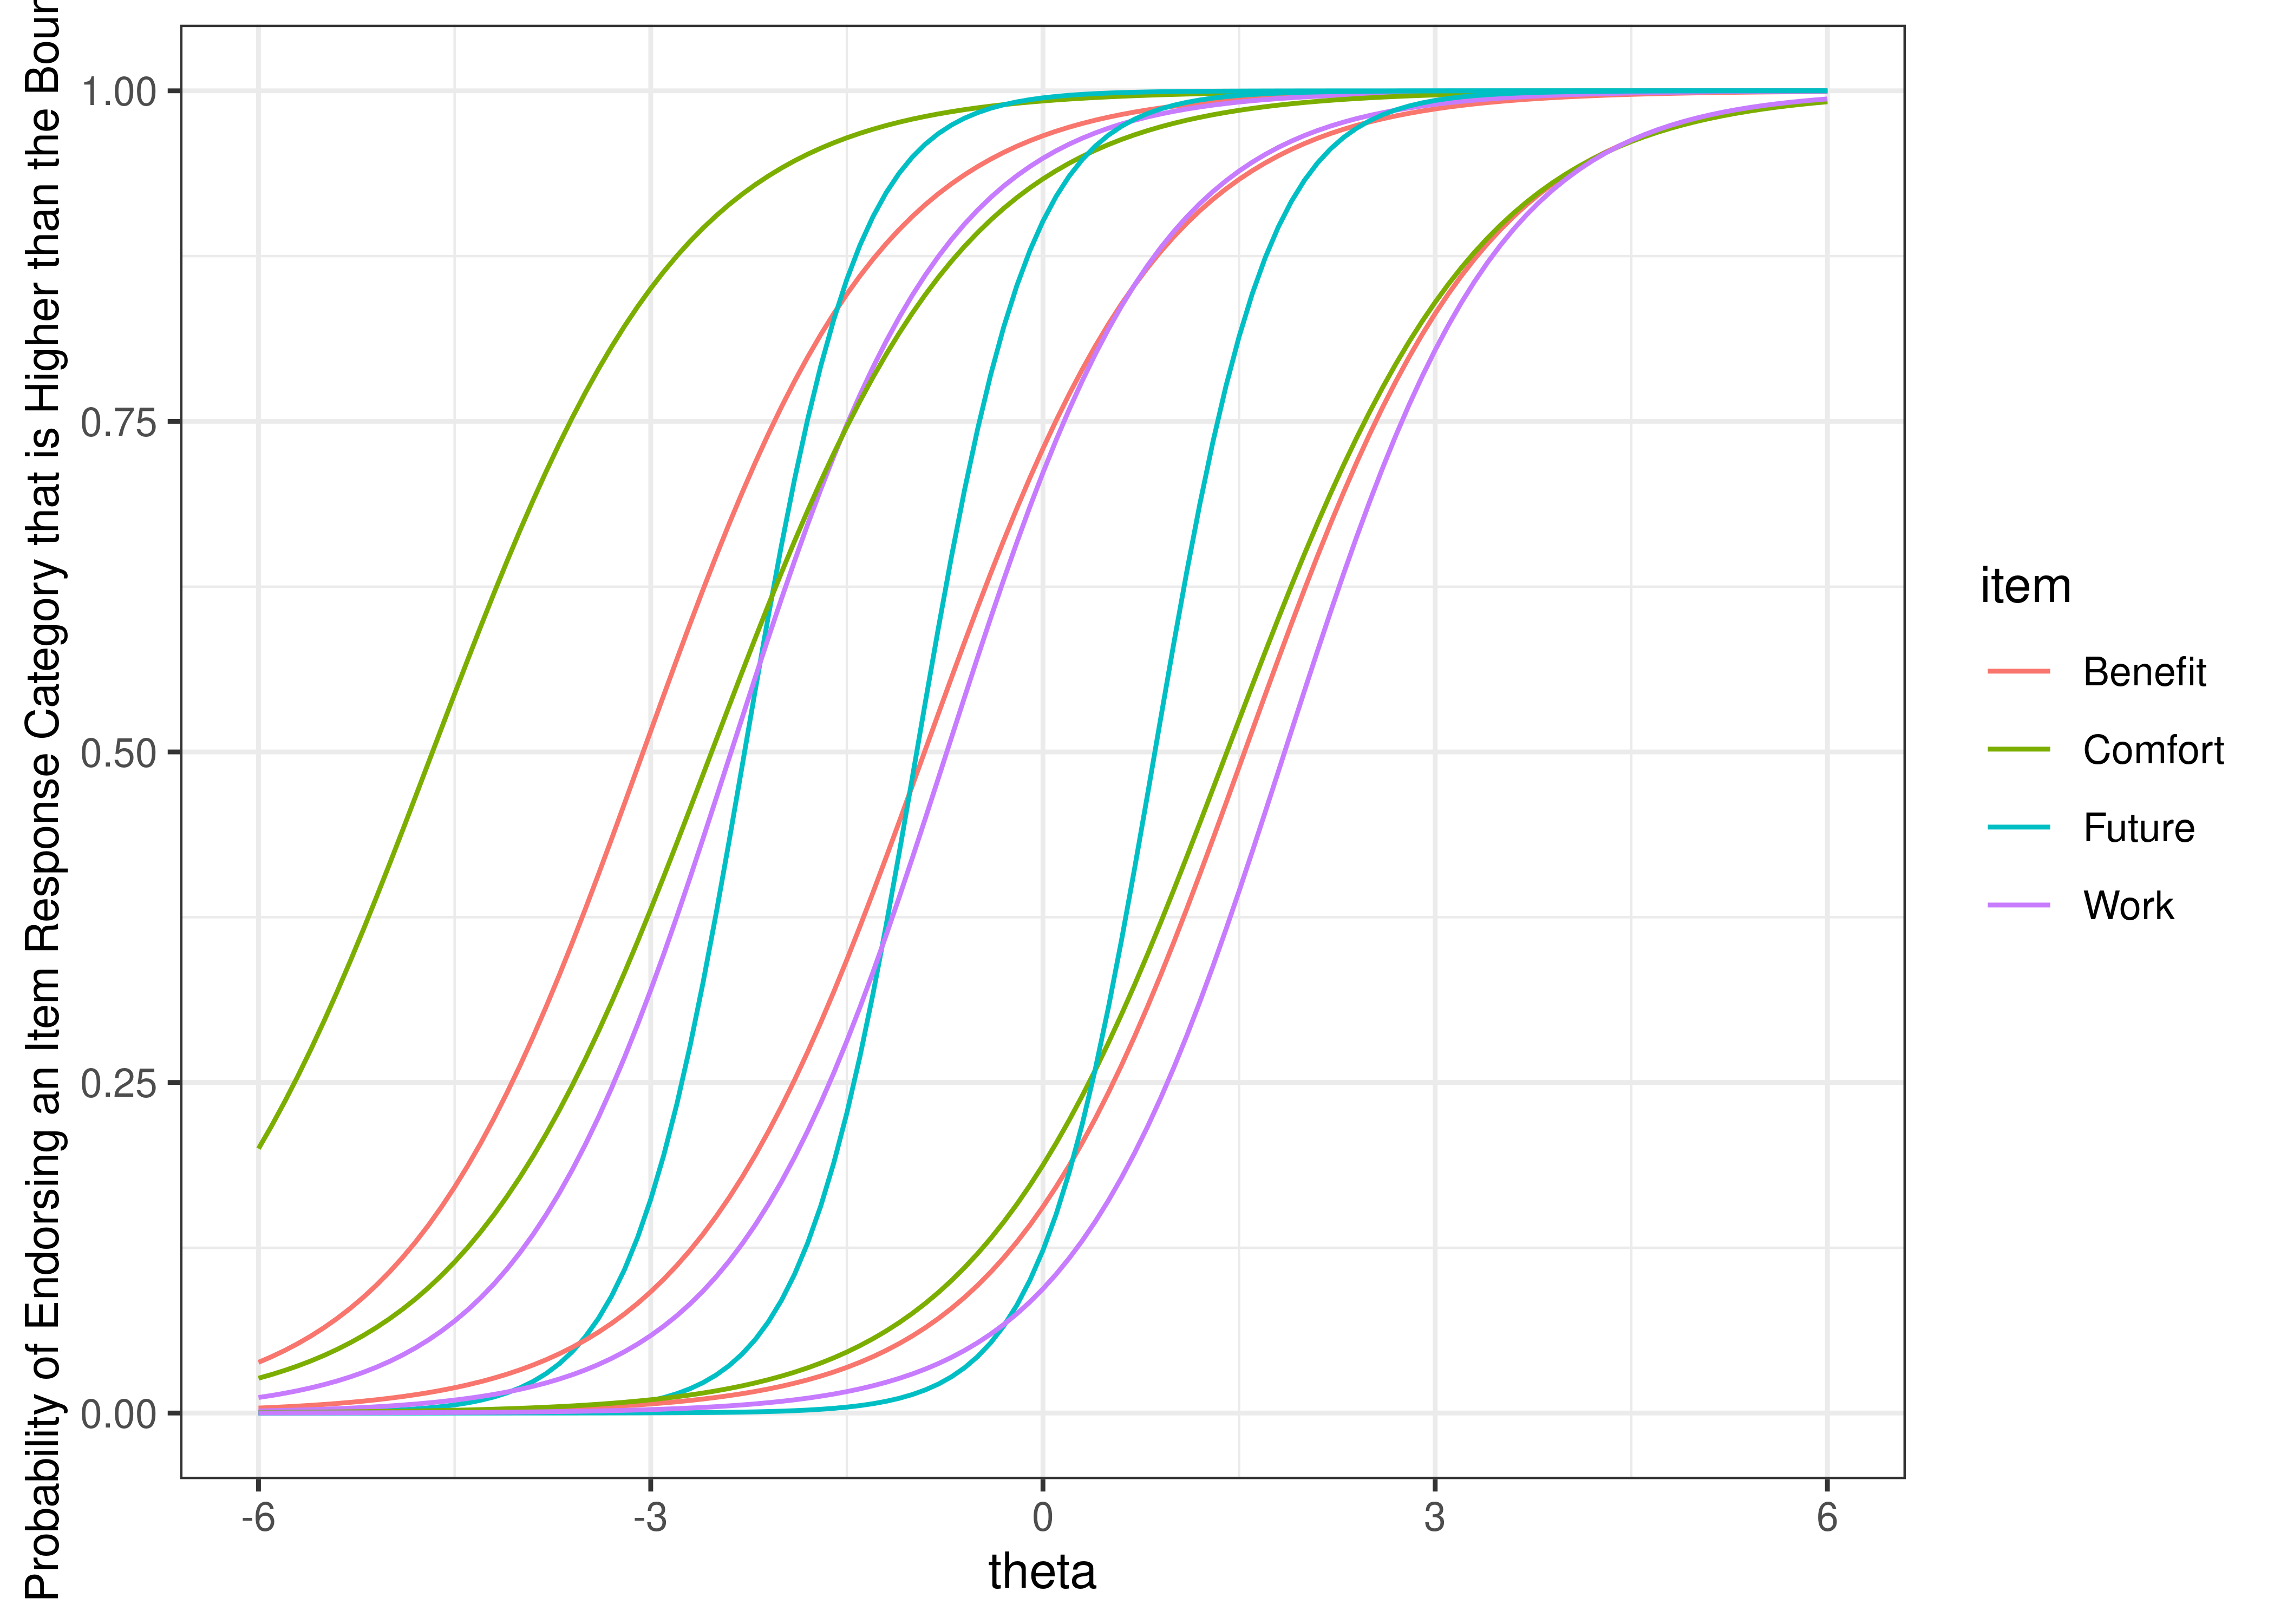 Item Boundary Category Characteristic Curves From Graded Response Model.